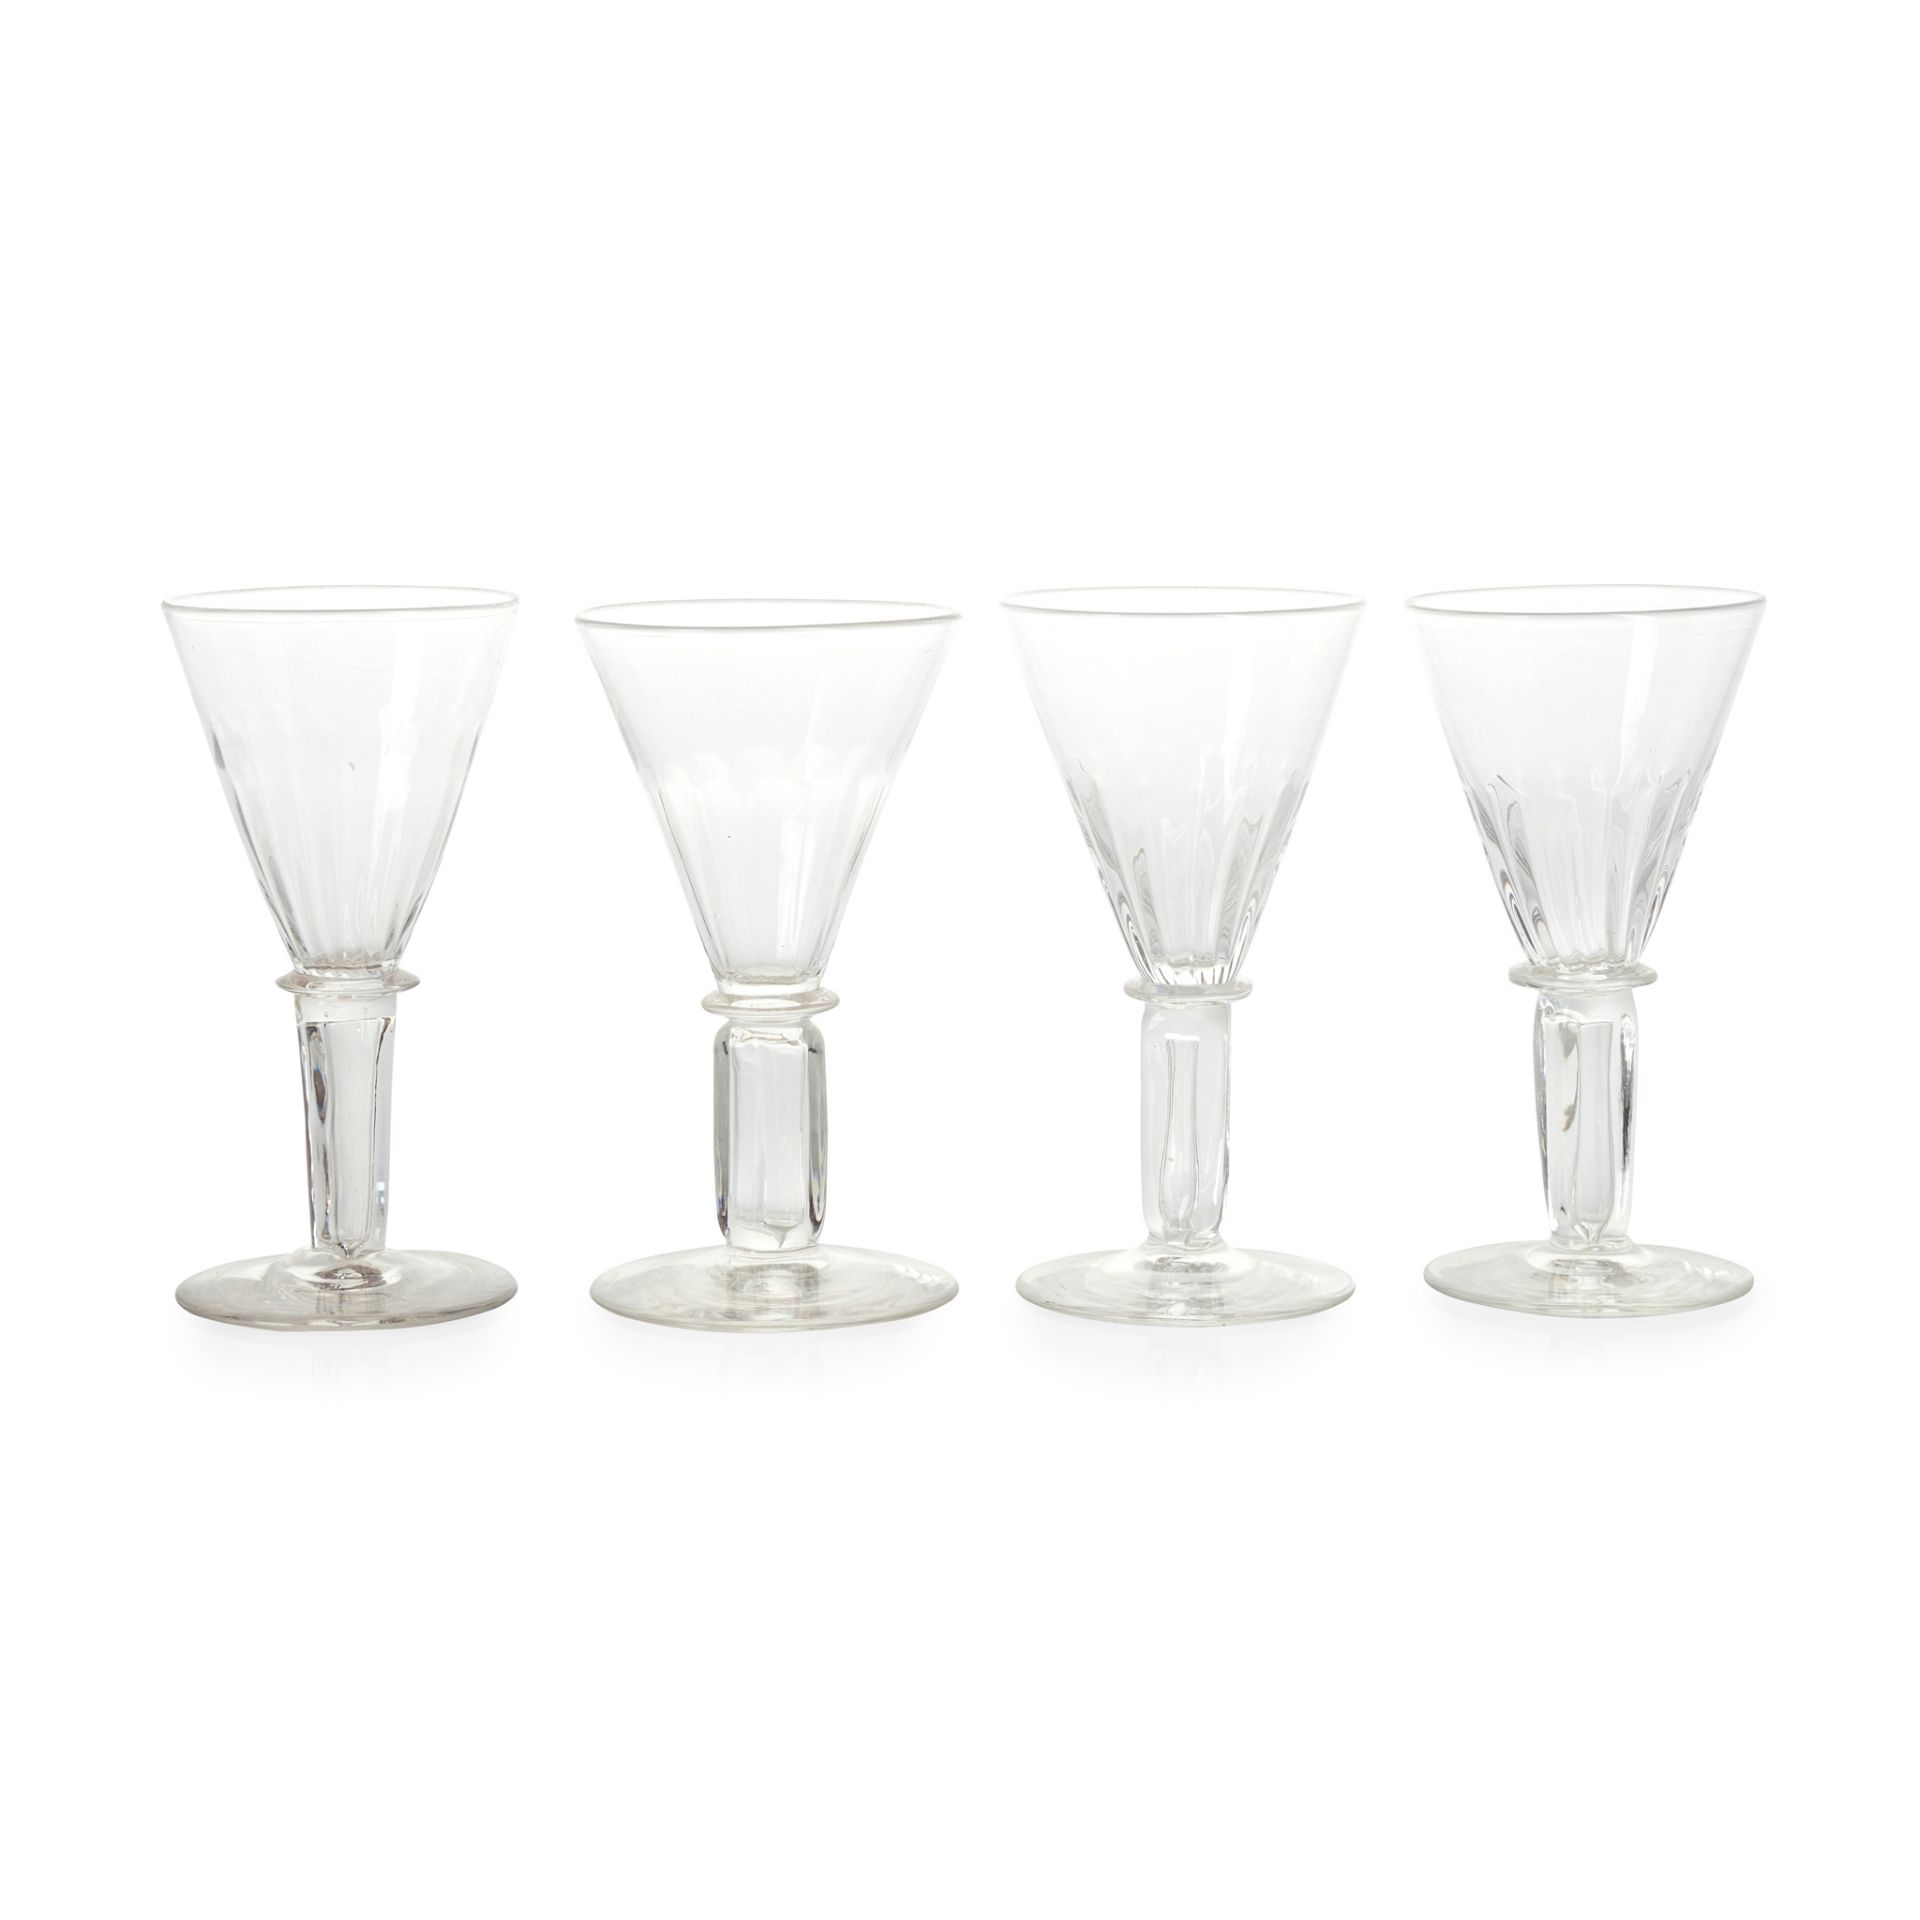 MANNER OF JAMES POWELL & SON GROUP OF ARTS & CRAFTS DRINKING GLASSES, CIRCA 1900 - Image 4 of 4